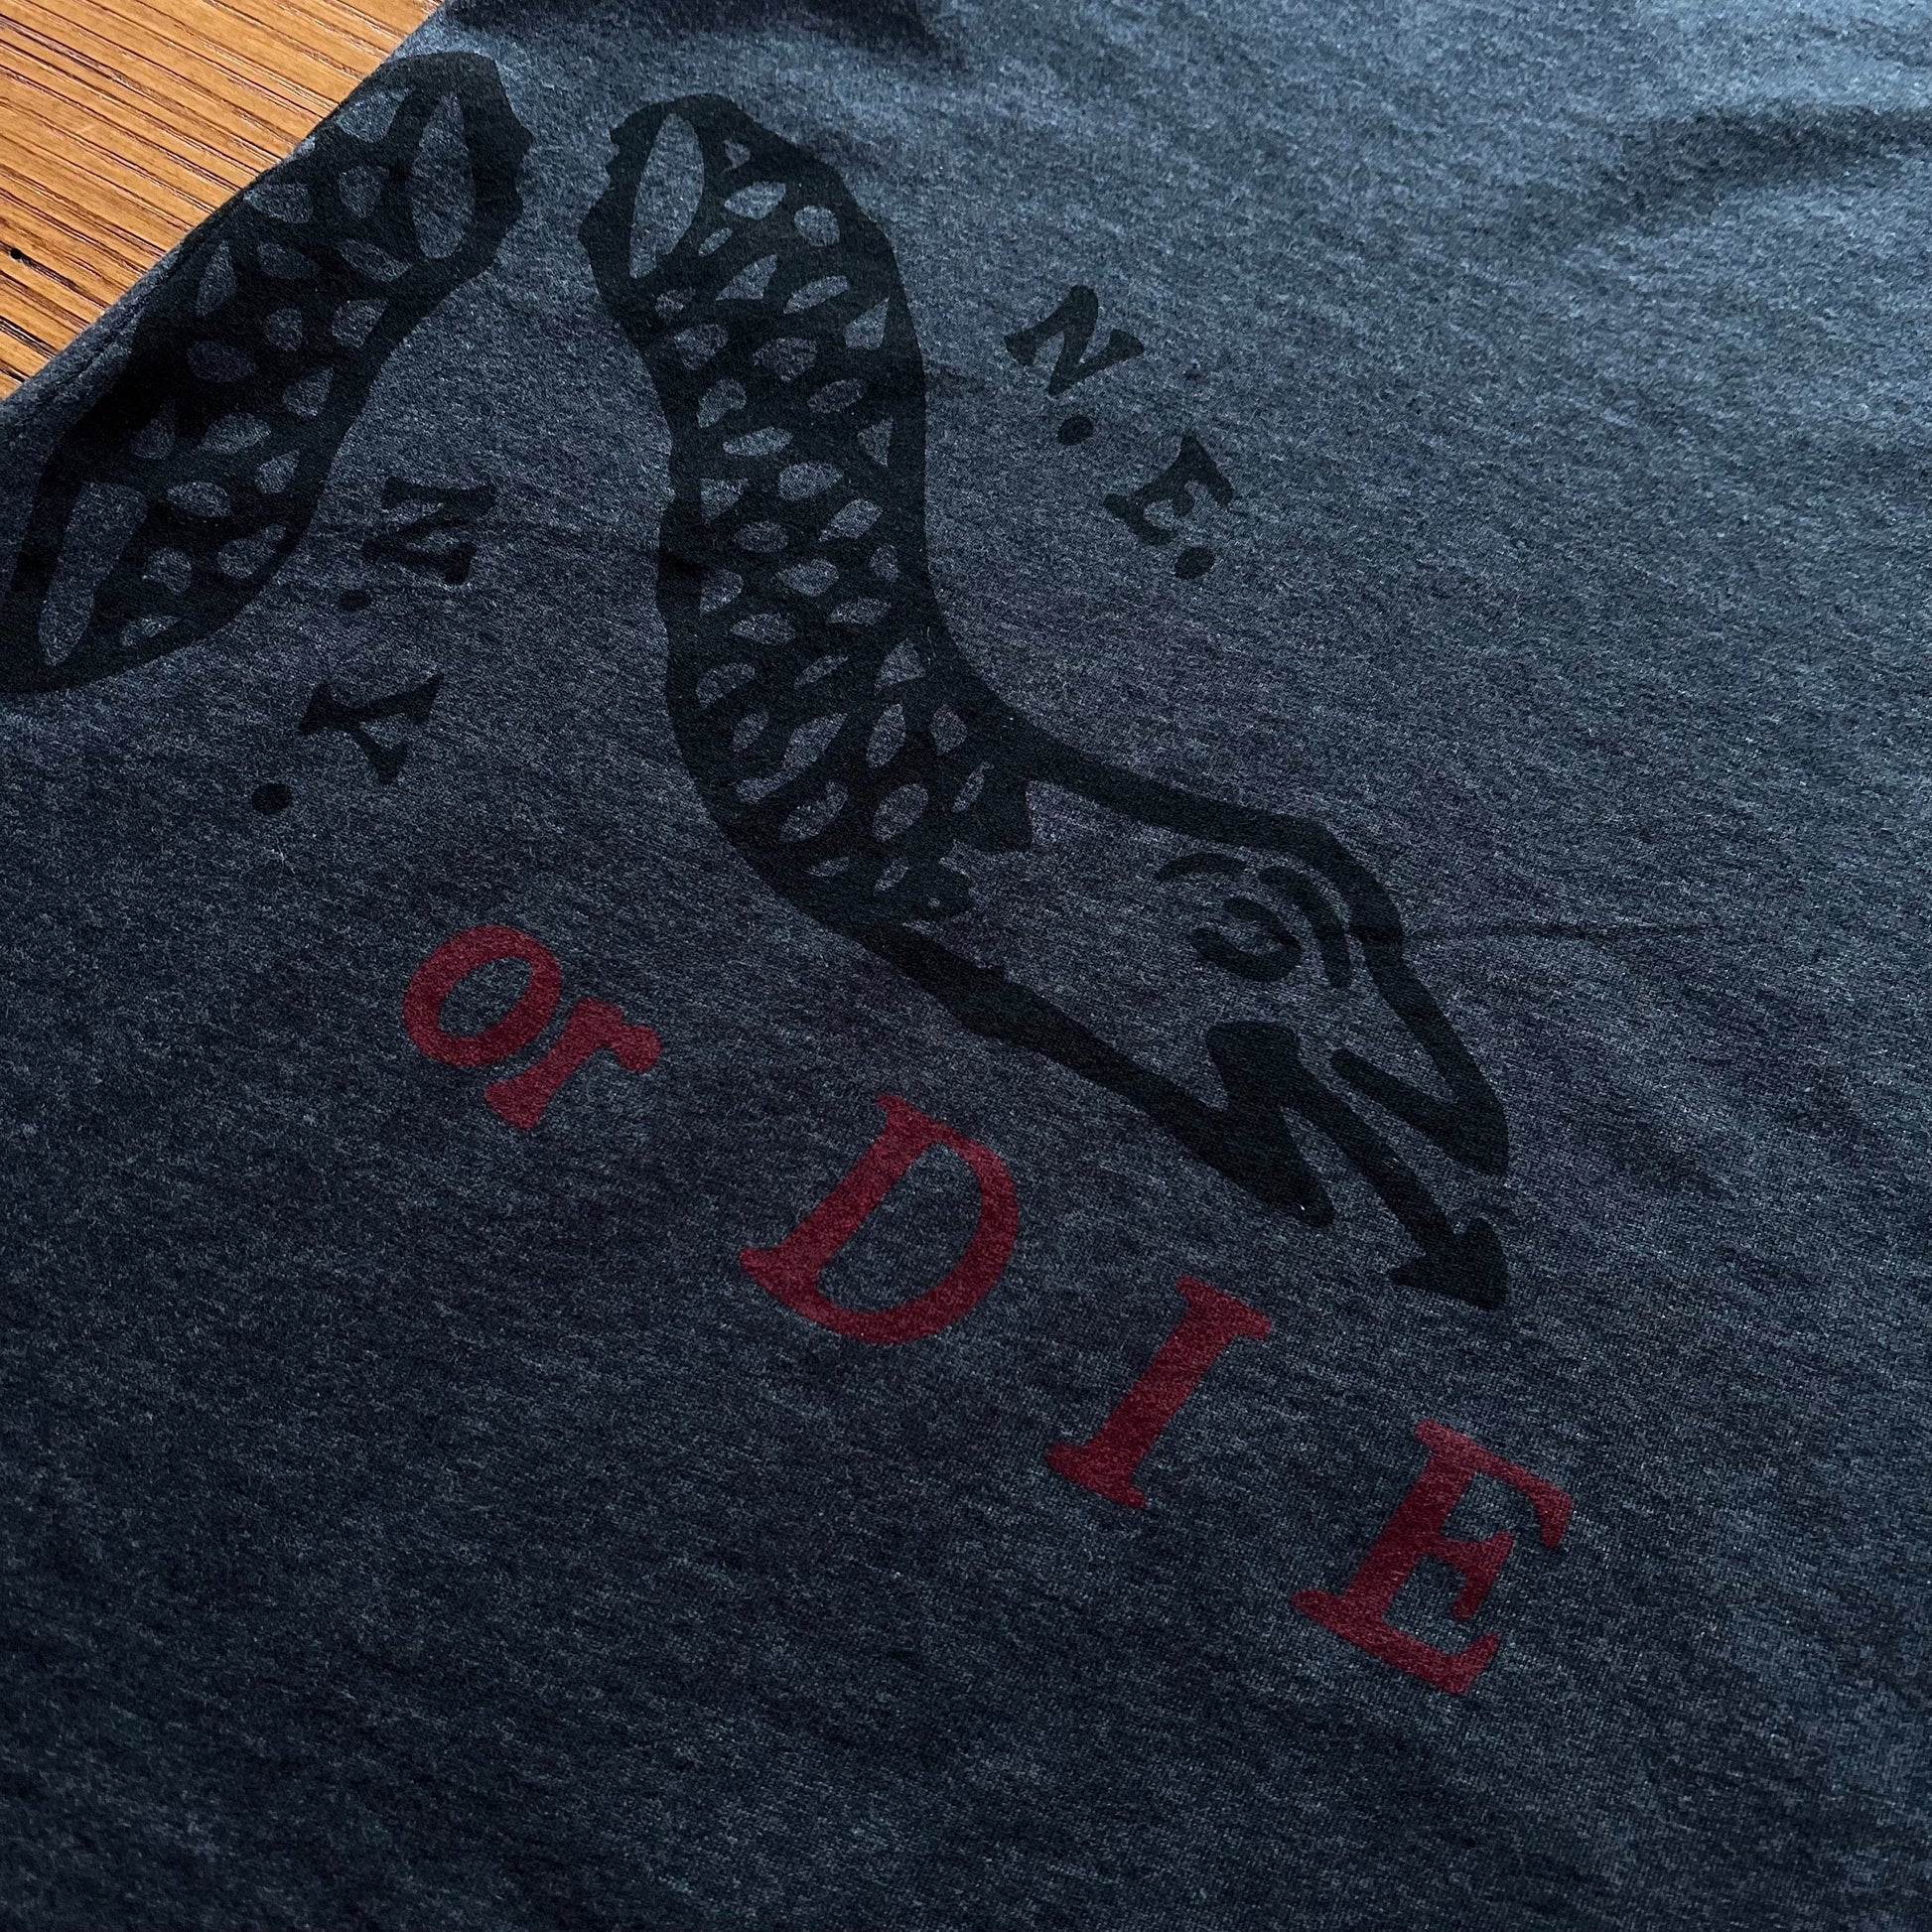 Close-up back of "Join or Die" V-neck shirt - Charcoal grey from the history list store